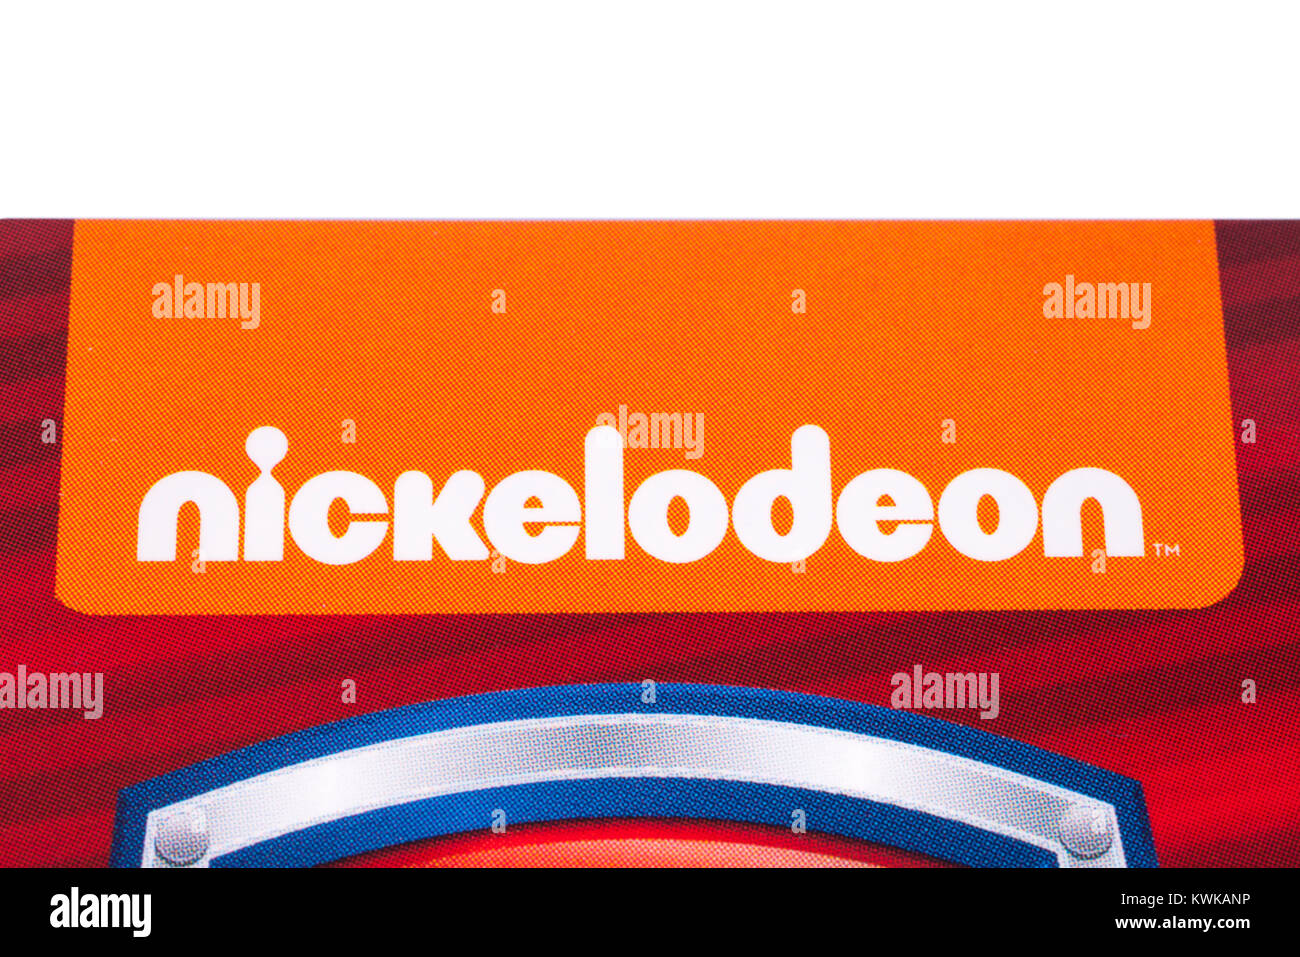 LONDON, UK - DECEMBER 18TH 2017: Close-up of the Nickelodeon logo, on 18th December 2017.  Nickelodeon is an American cable and satellite television n Stock Photo